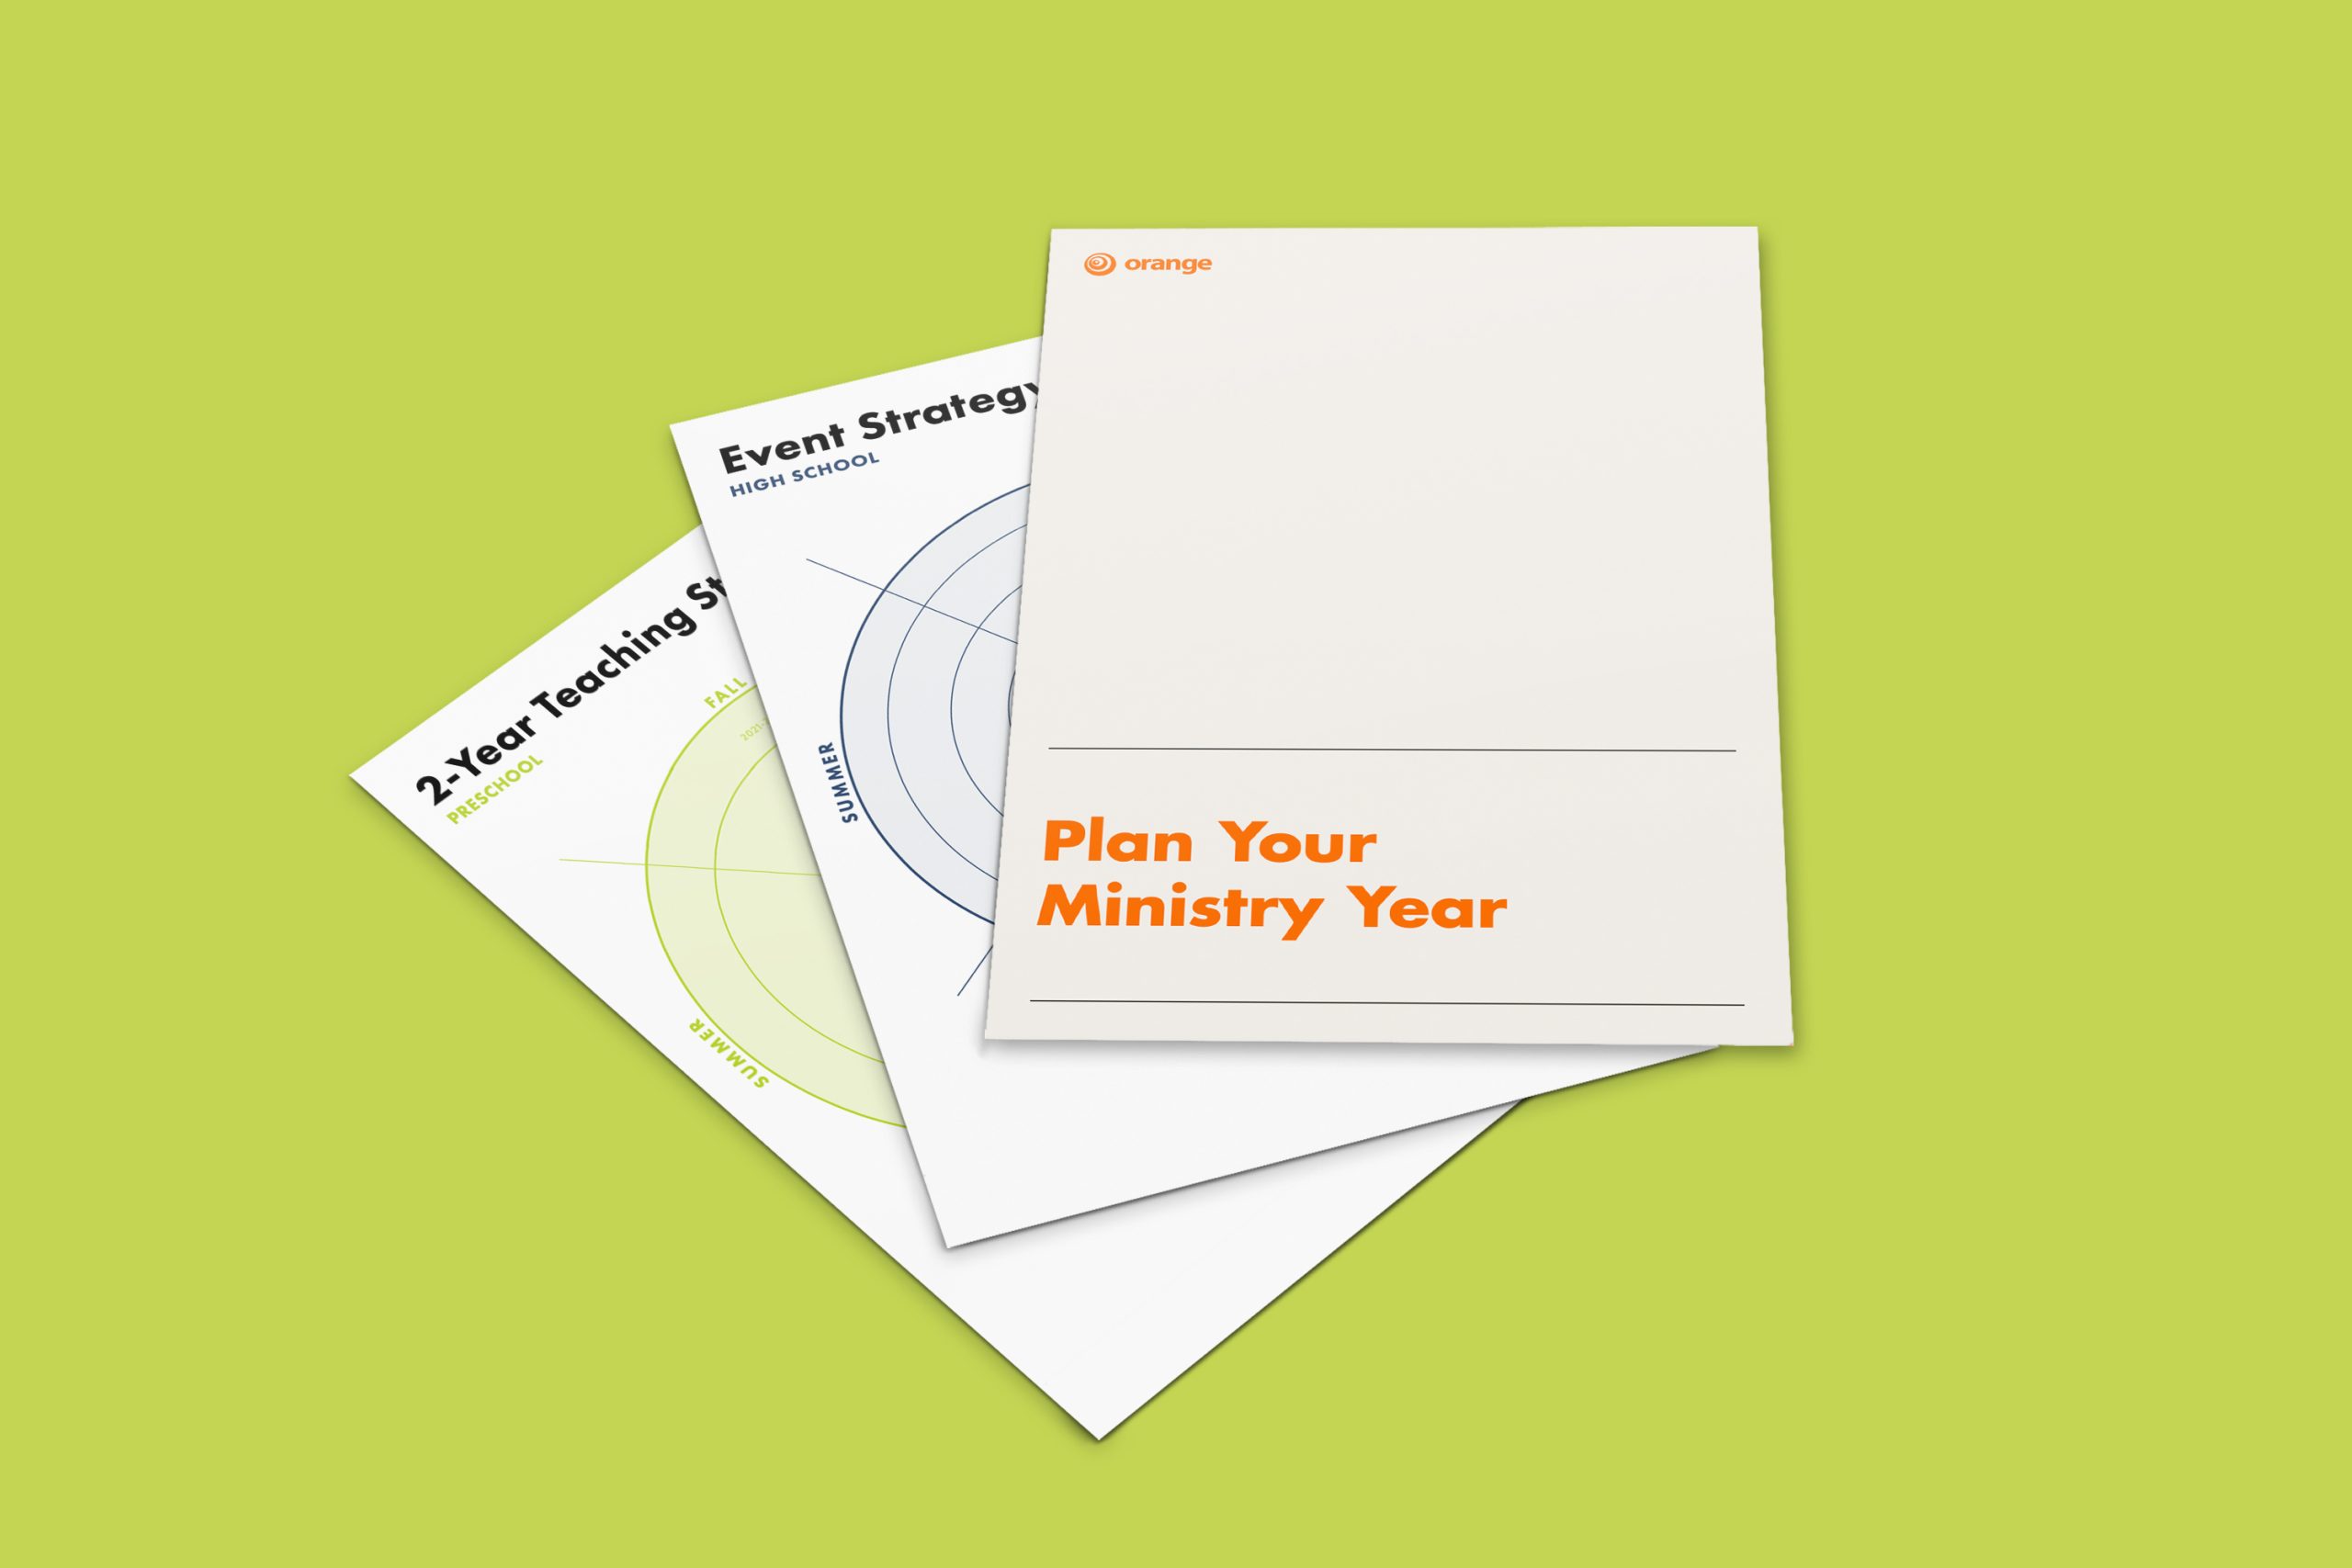 How To Plan Your Ministry Year